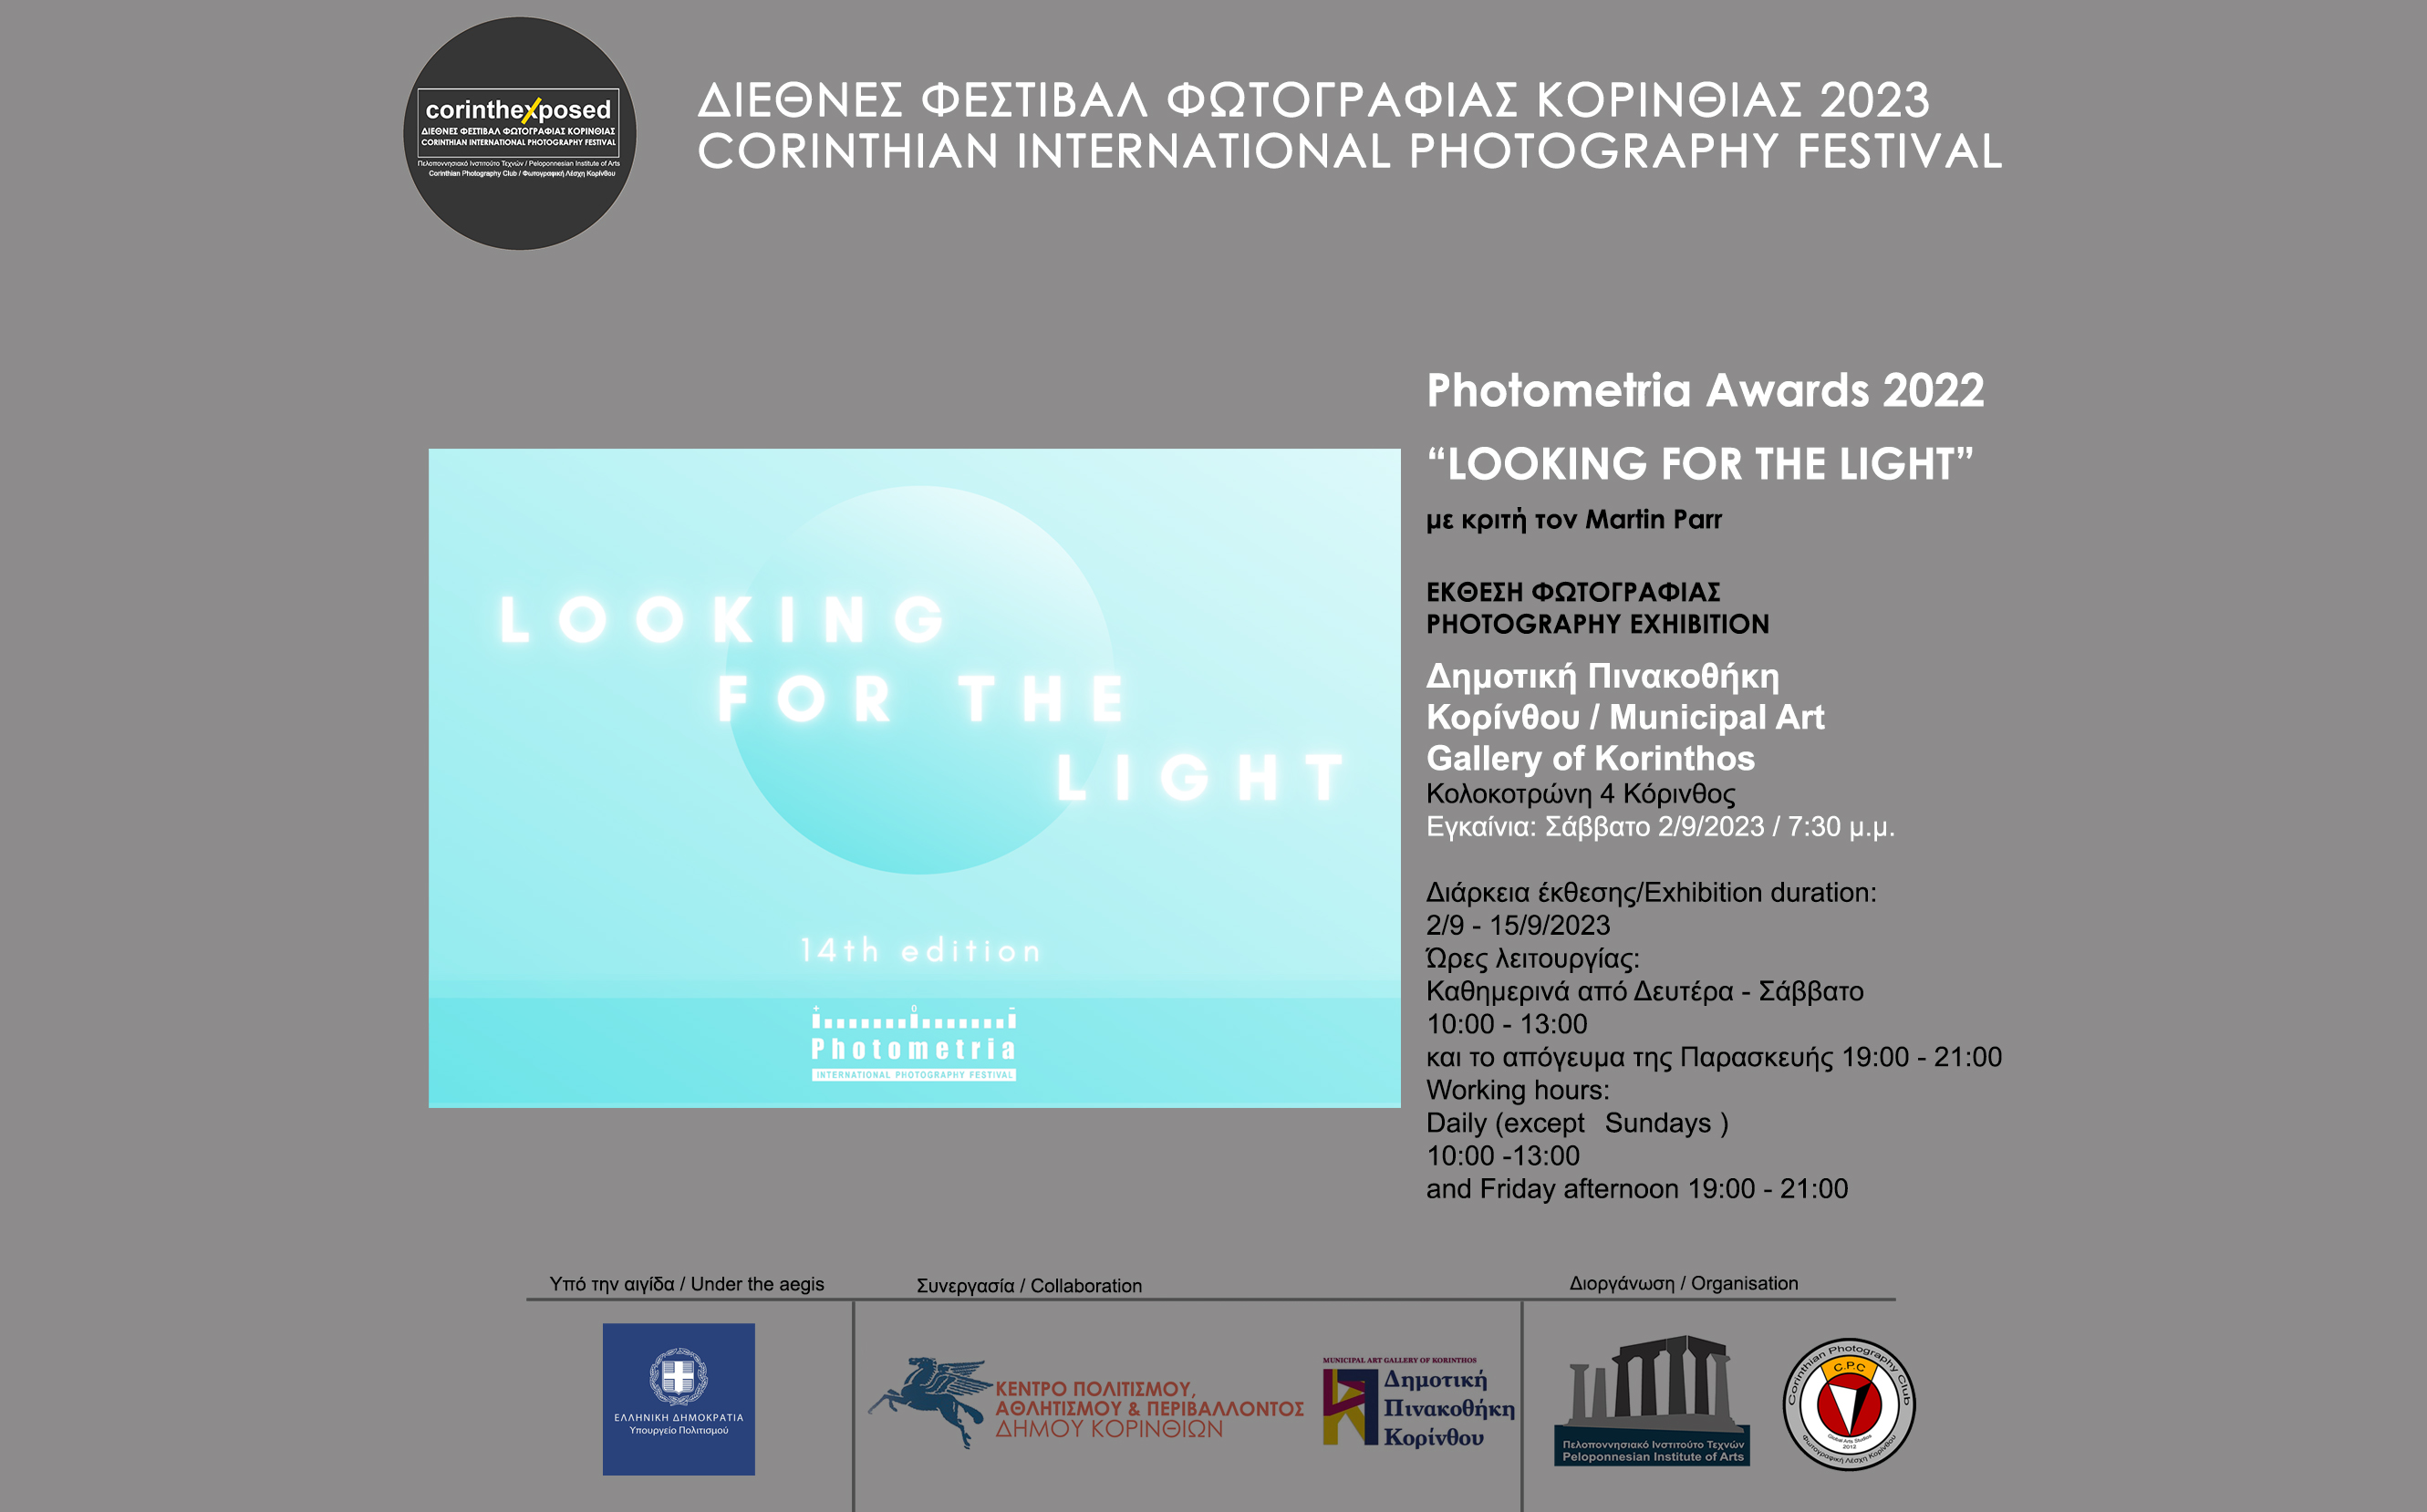 Photometria Awards 2022 exhibition "Looking for the light"